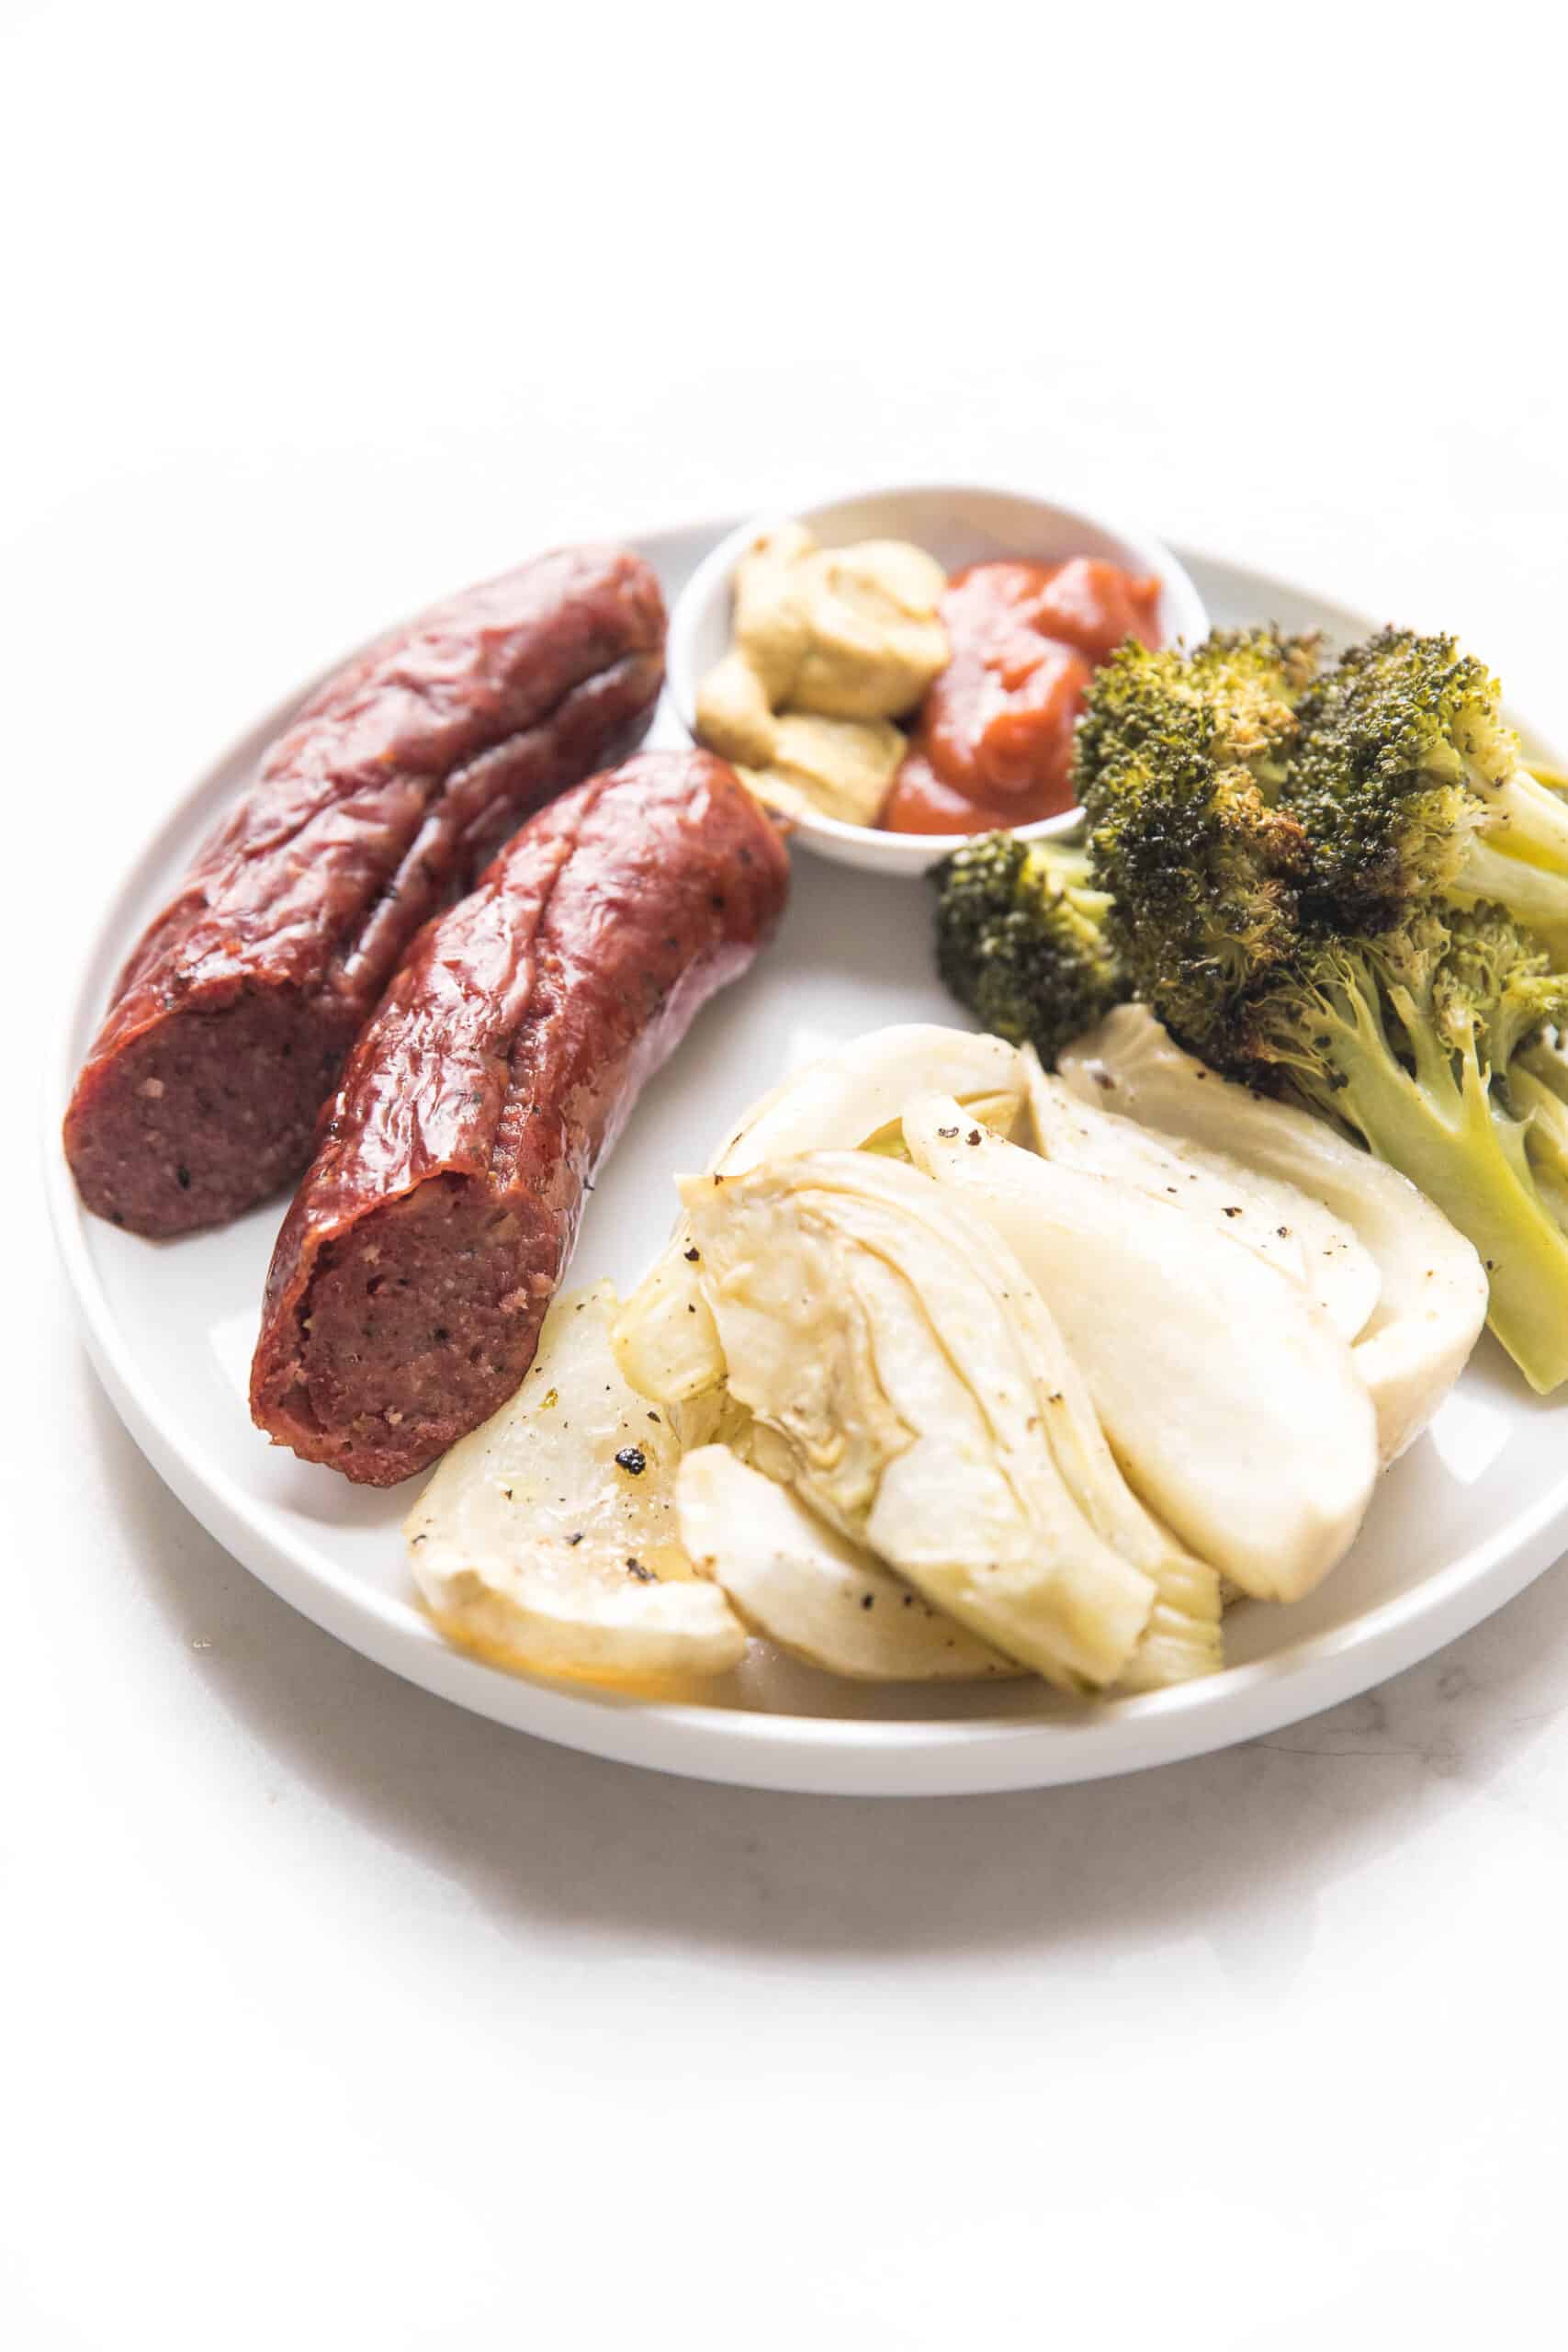 sausage, roasted fennel and broccoli on a white plate and background